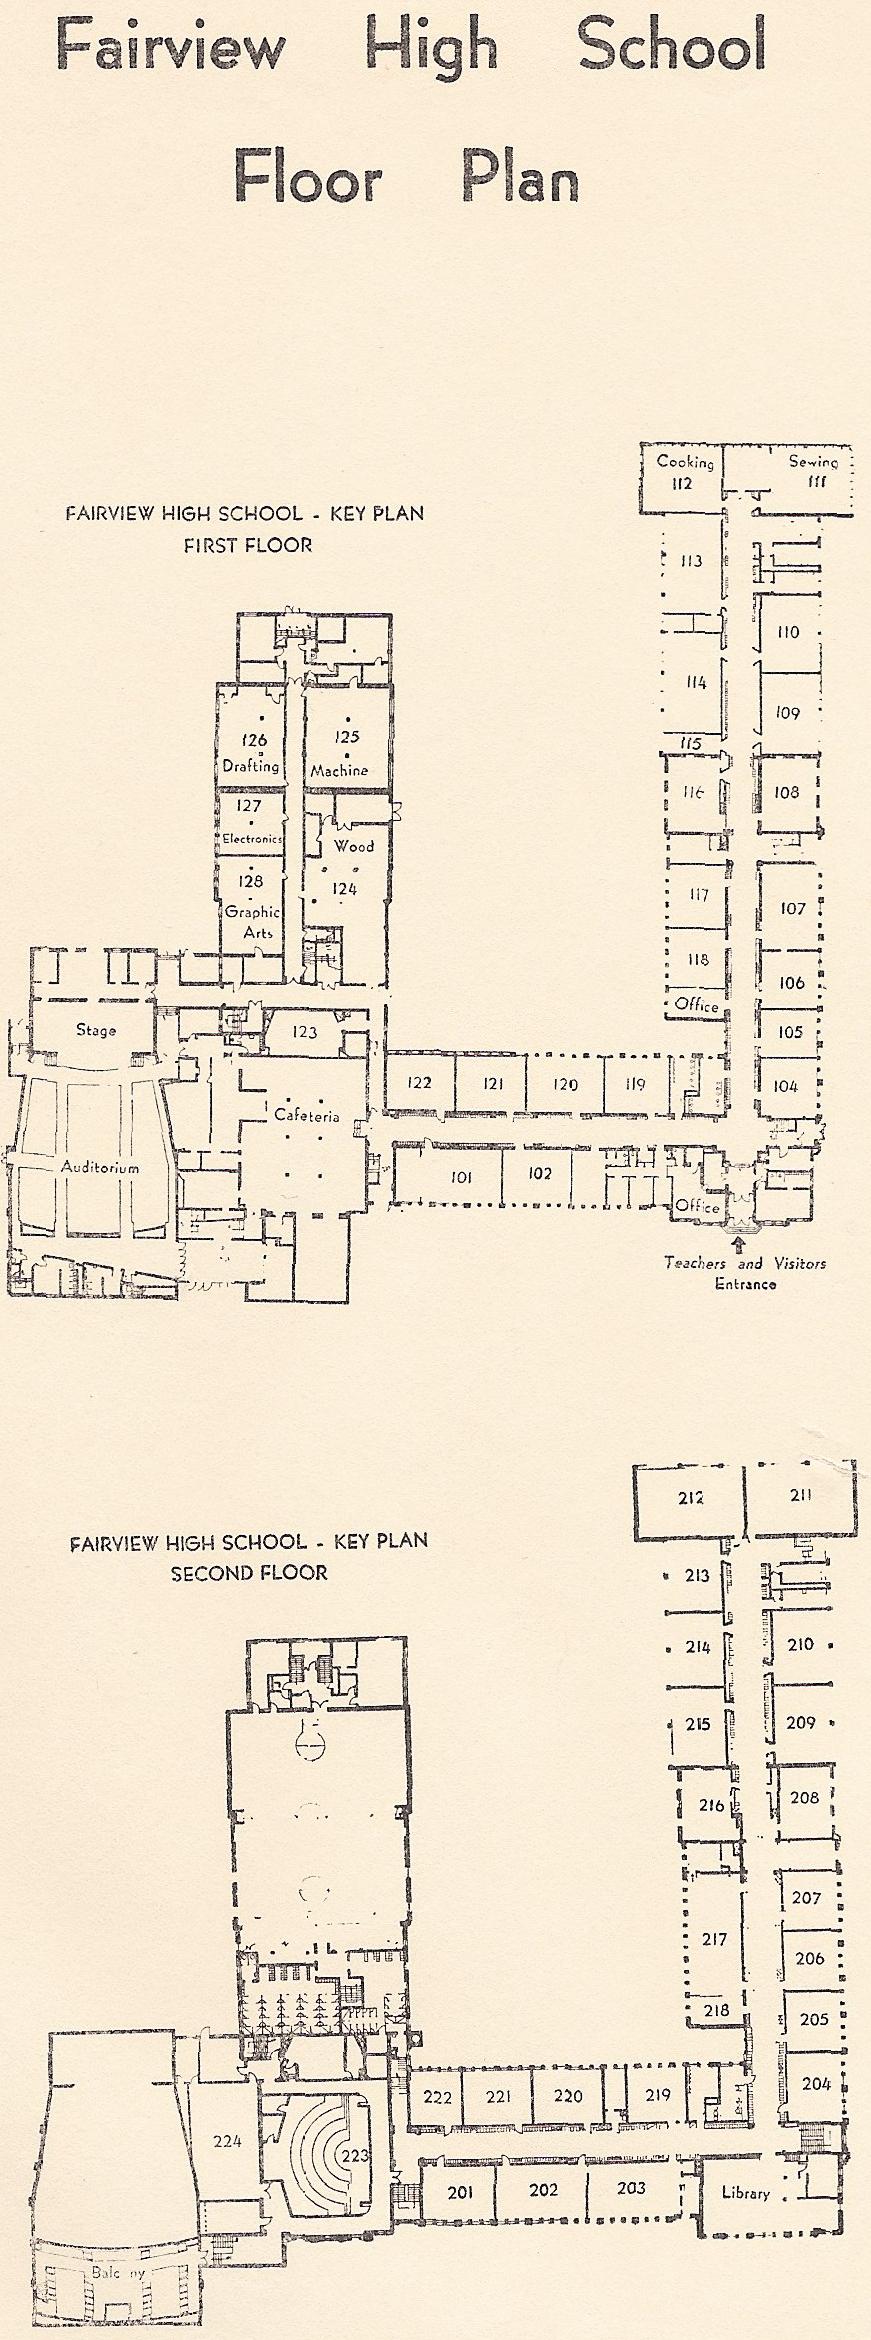 Floor plan included in the 1962 